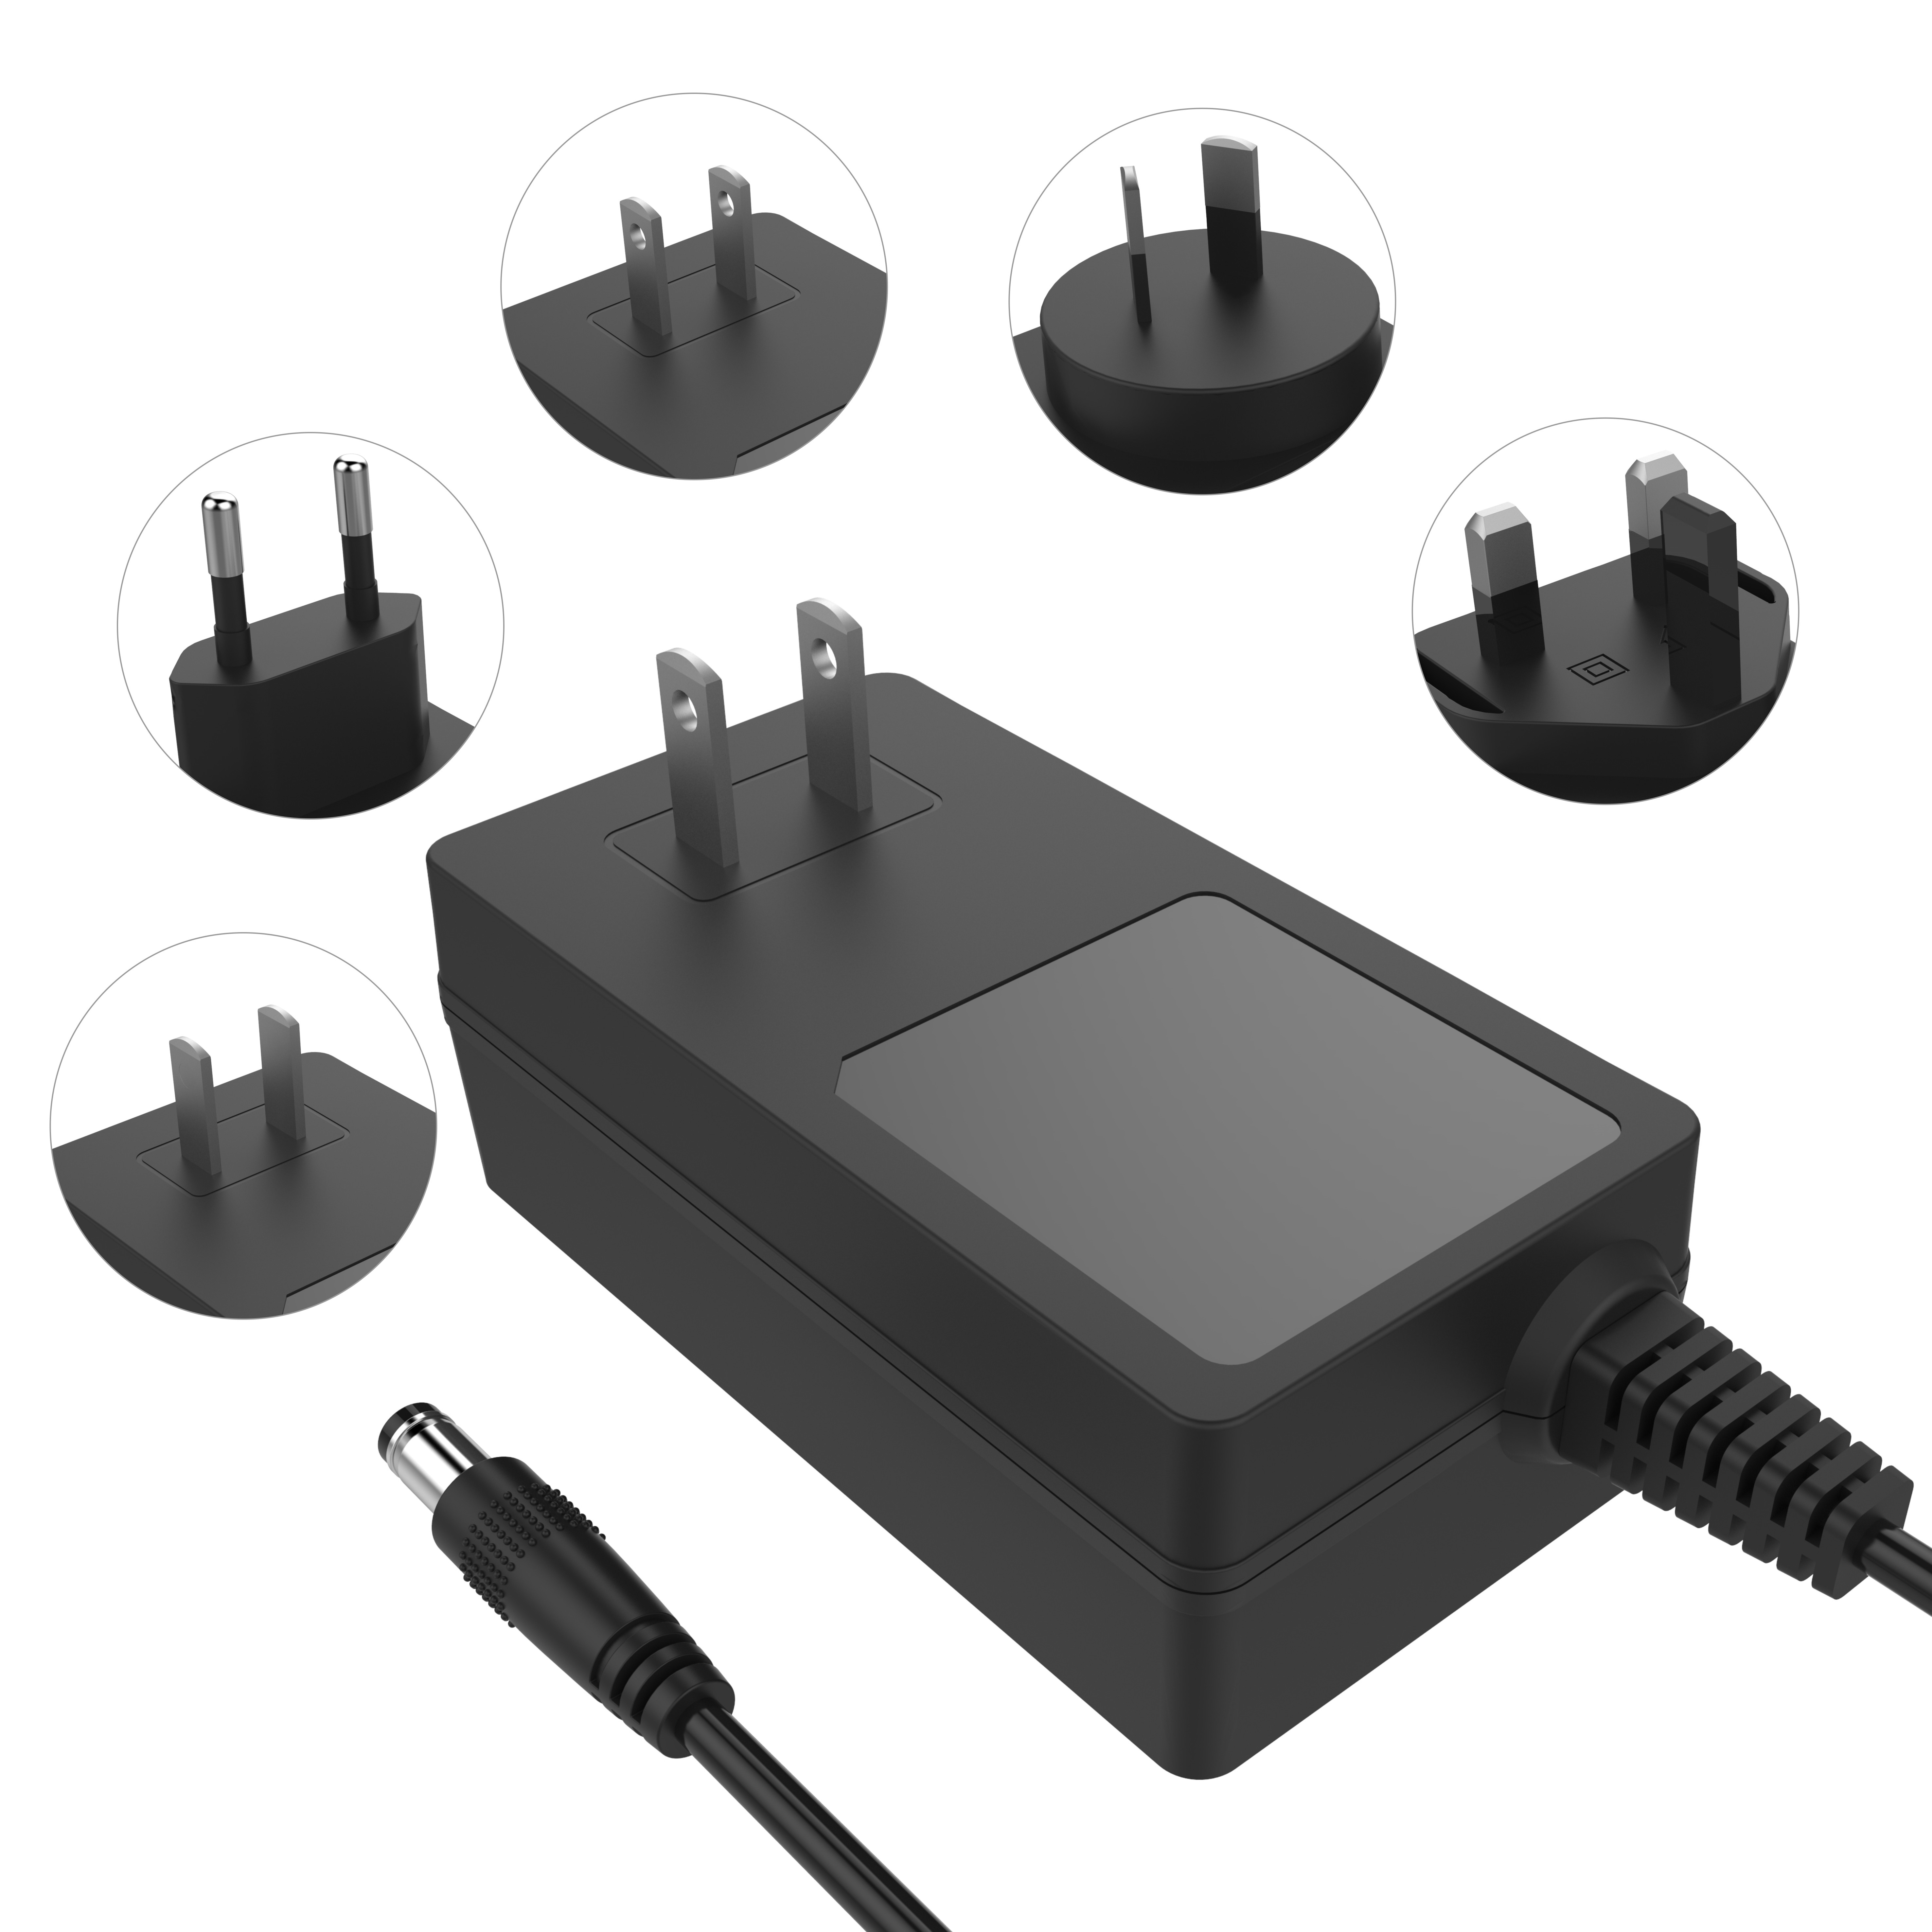 Frontpower switching adapter 24V 1.5A 15V 2.4A 12V 3A power adapter with UKCA CB for uk market